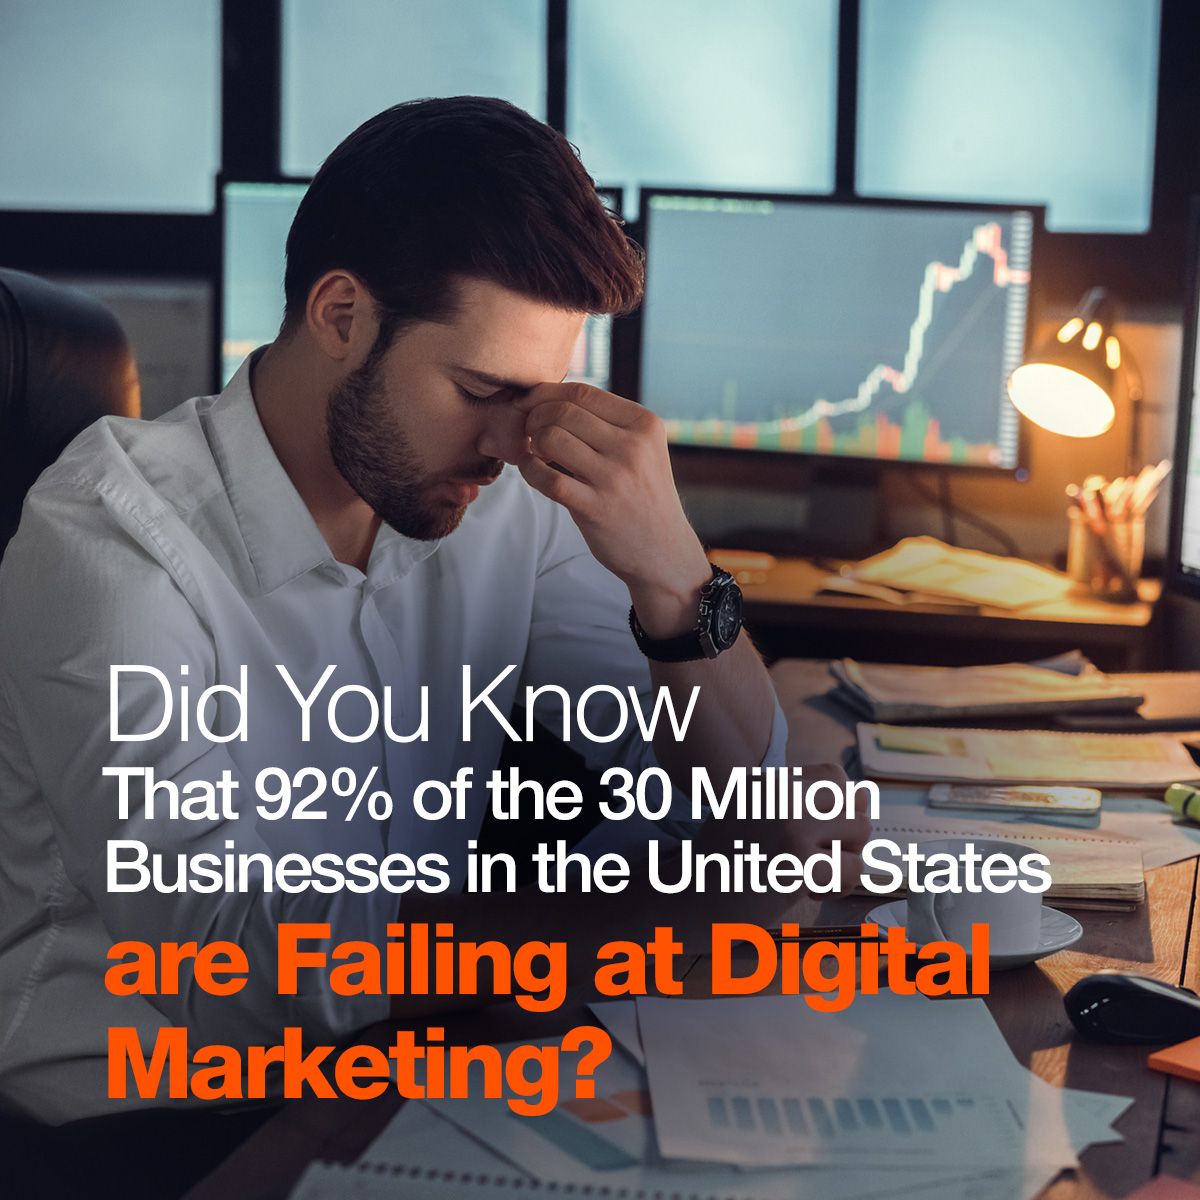 Did You Know That 92% of the 30 Million Businesses in the United States are Failing at Digital Marketing?